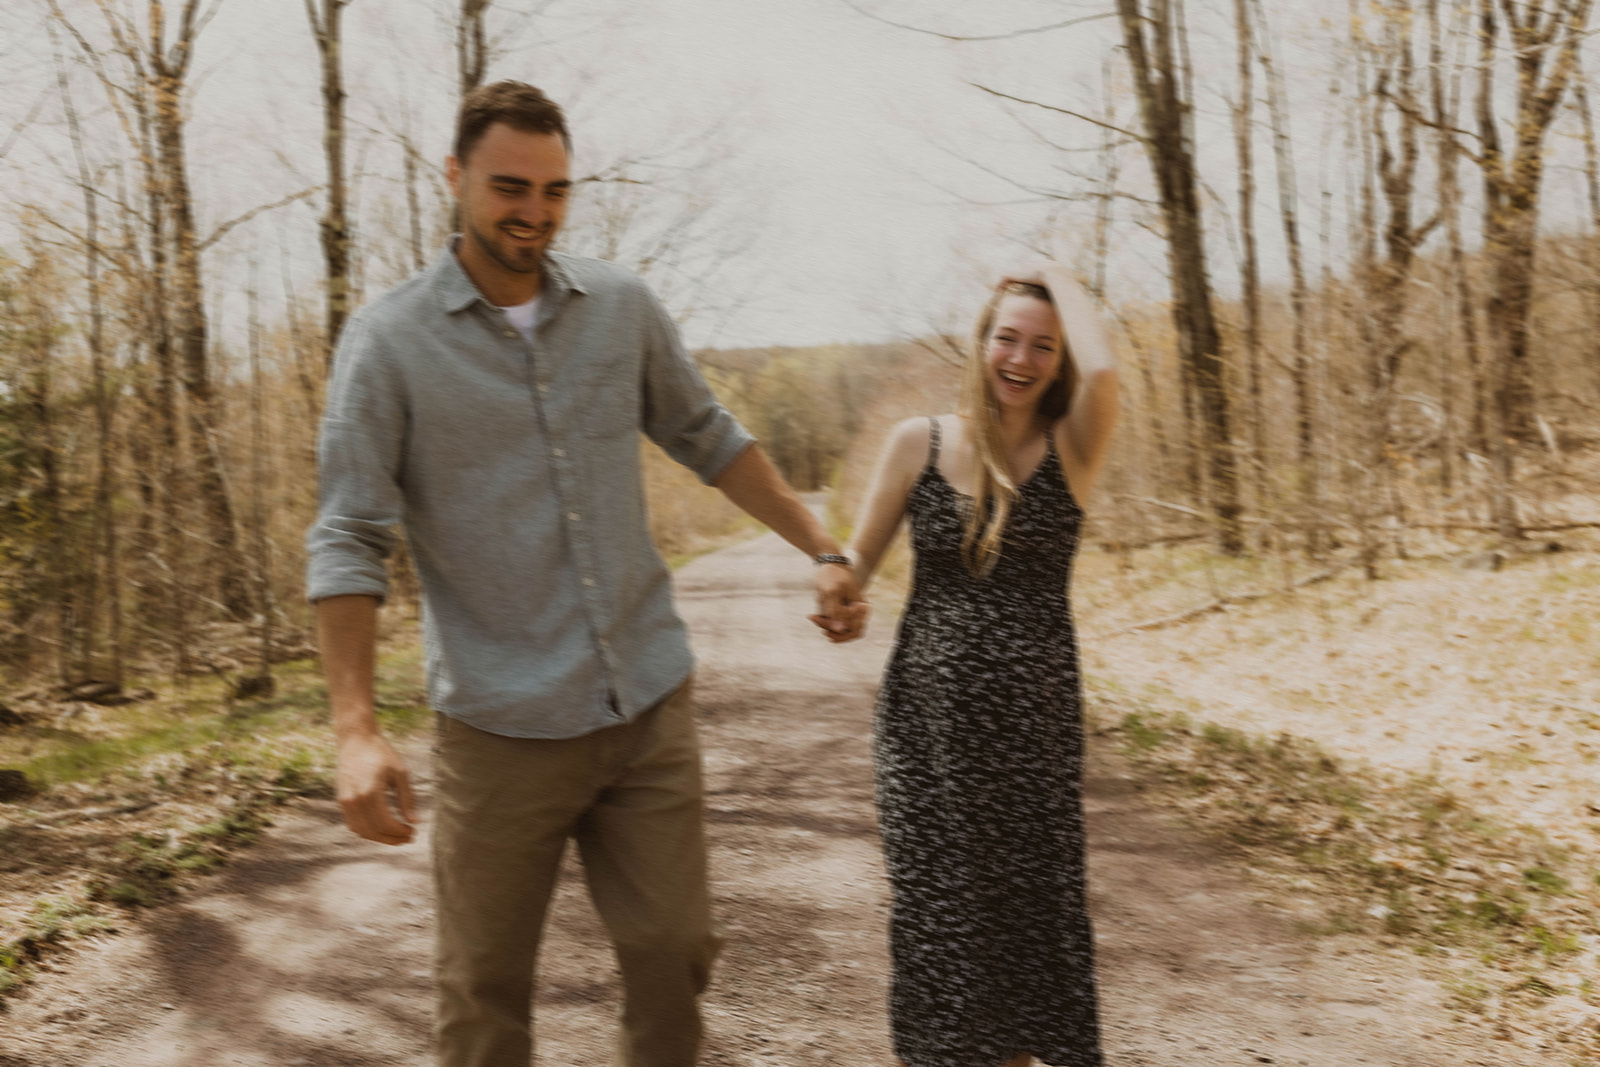 Stunning future mom and dad walk together and share laughter on a country road